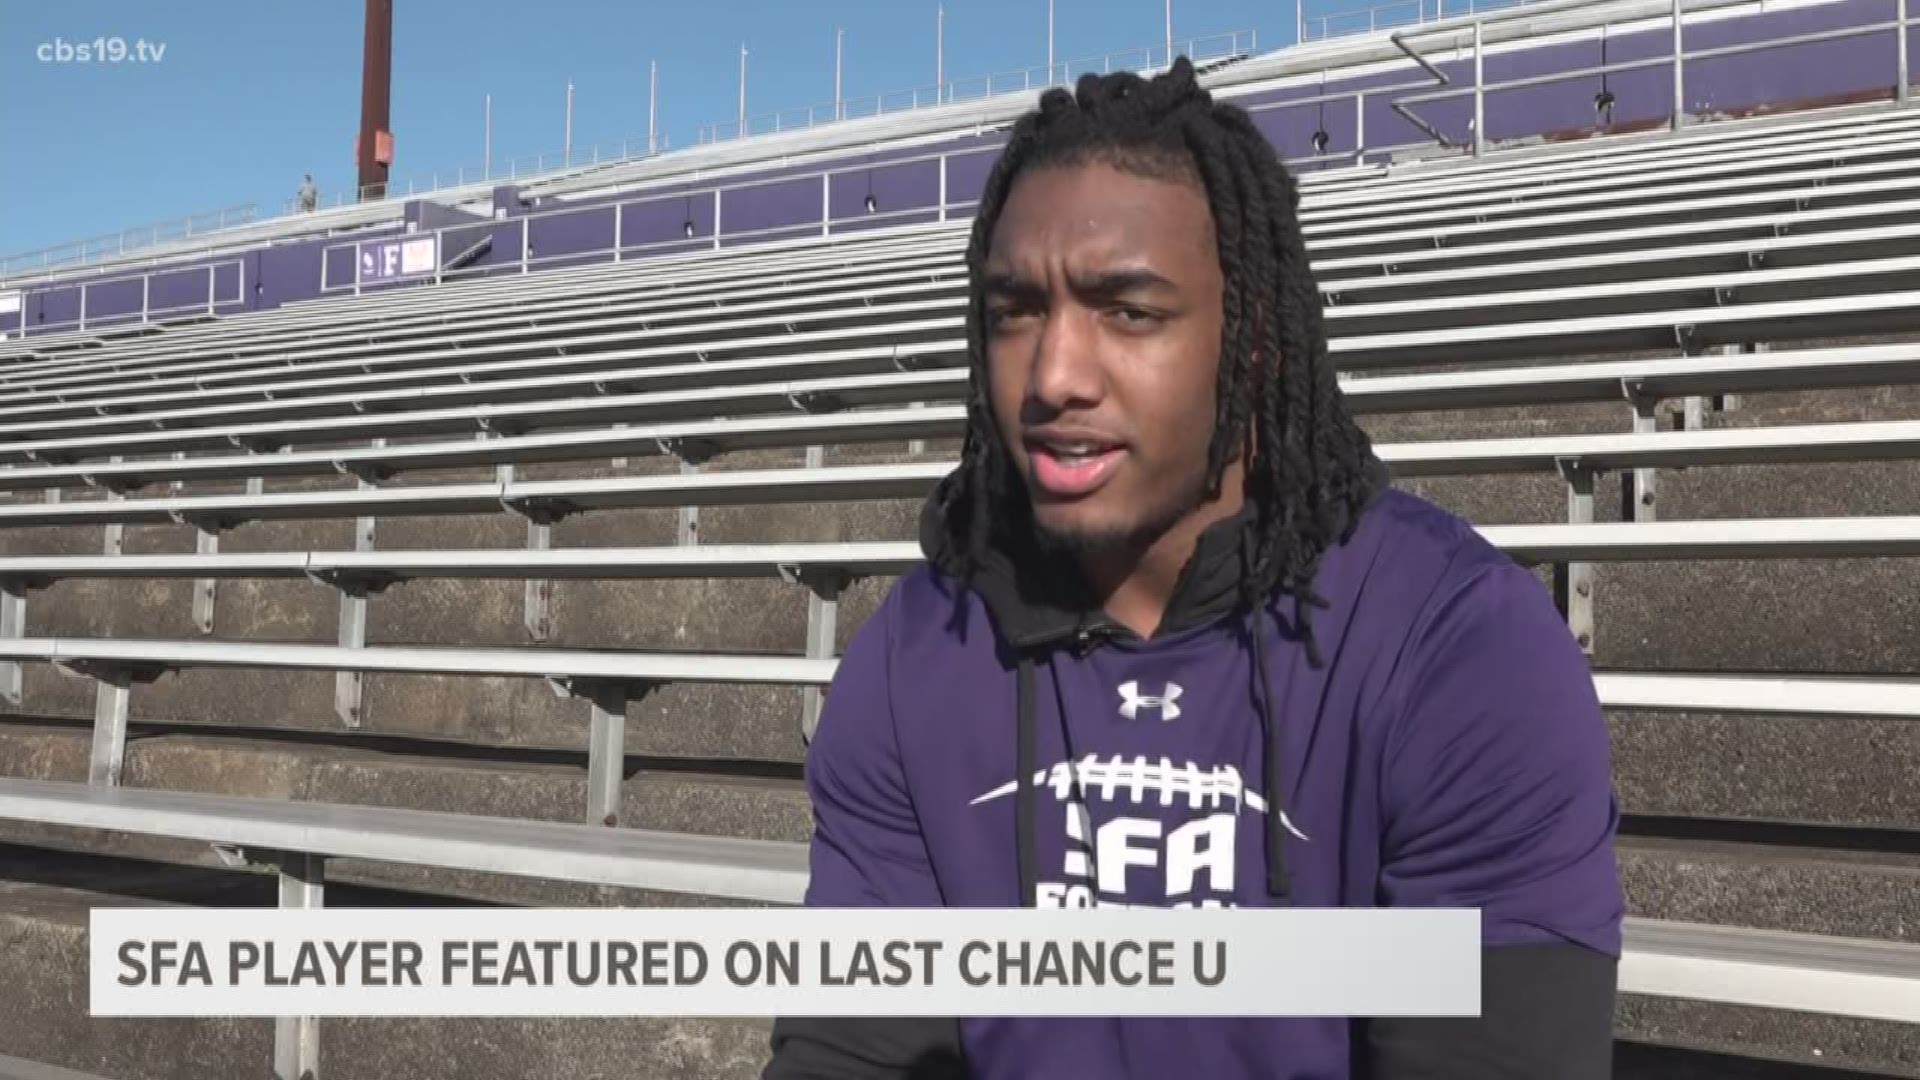 SFA Football player Kirkland Joseph, takes us through his journey after appearing on a Netflix series Last Chance U. His dream while at a community college in Kansas was to play Divsion 1 football.